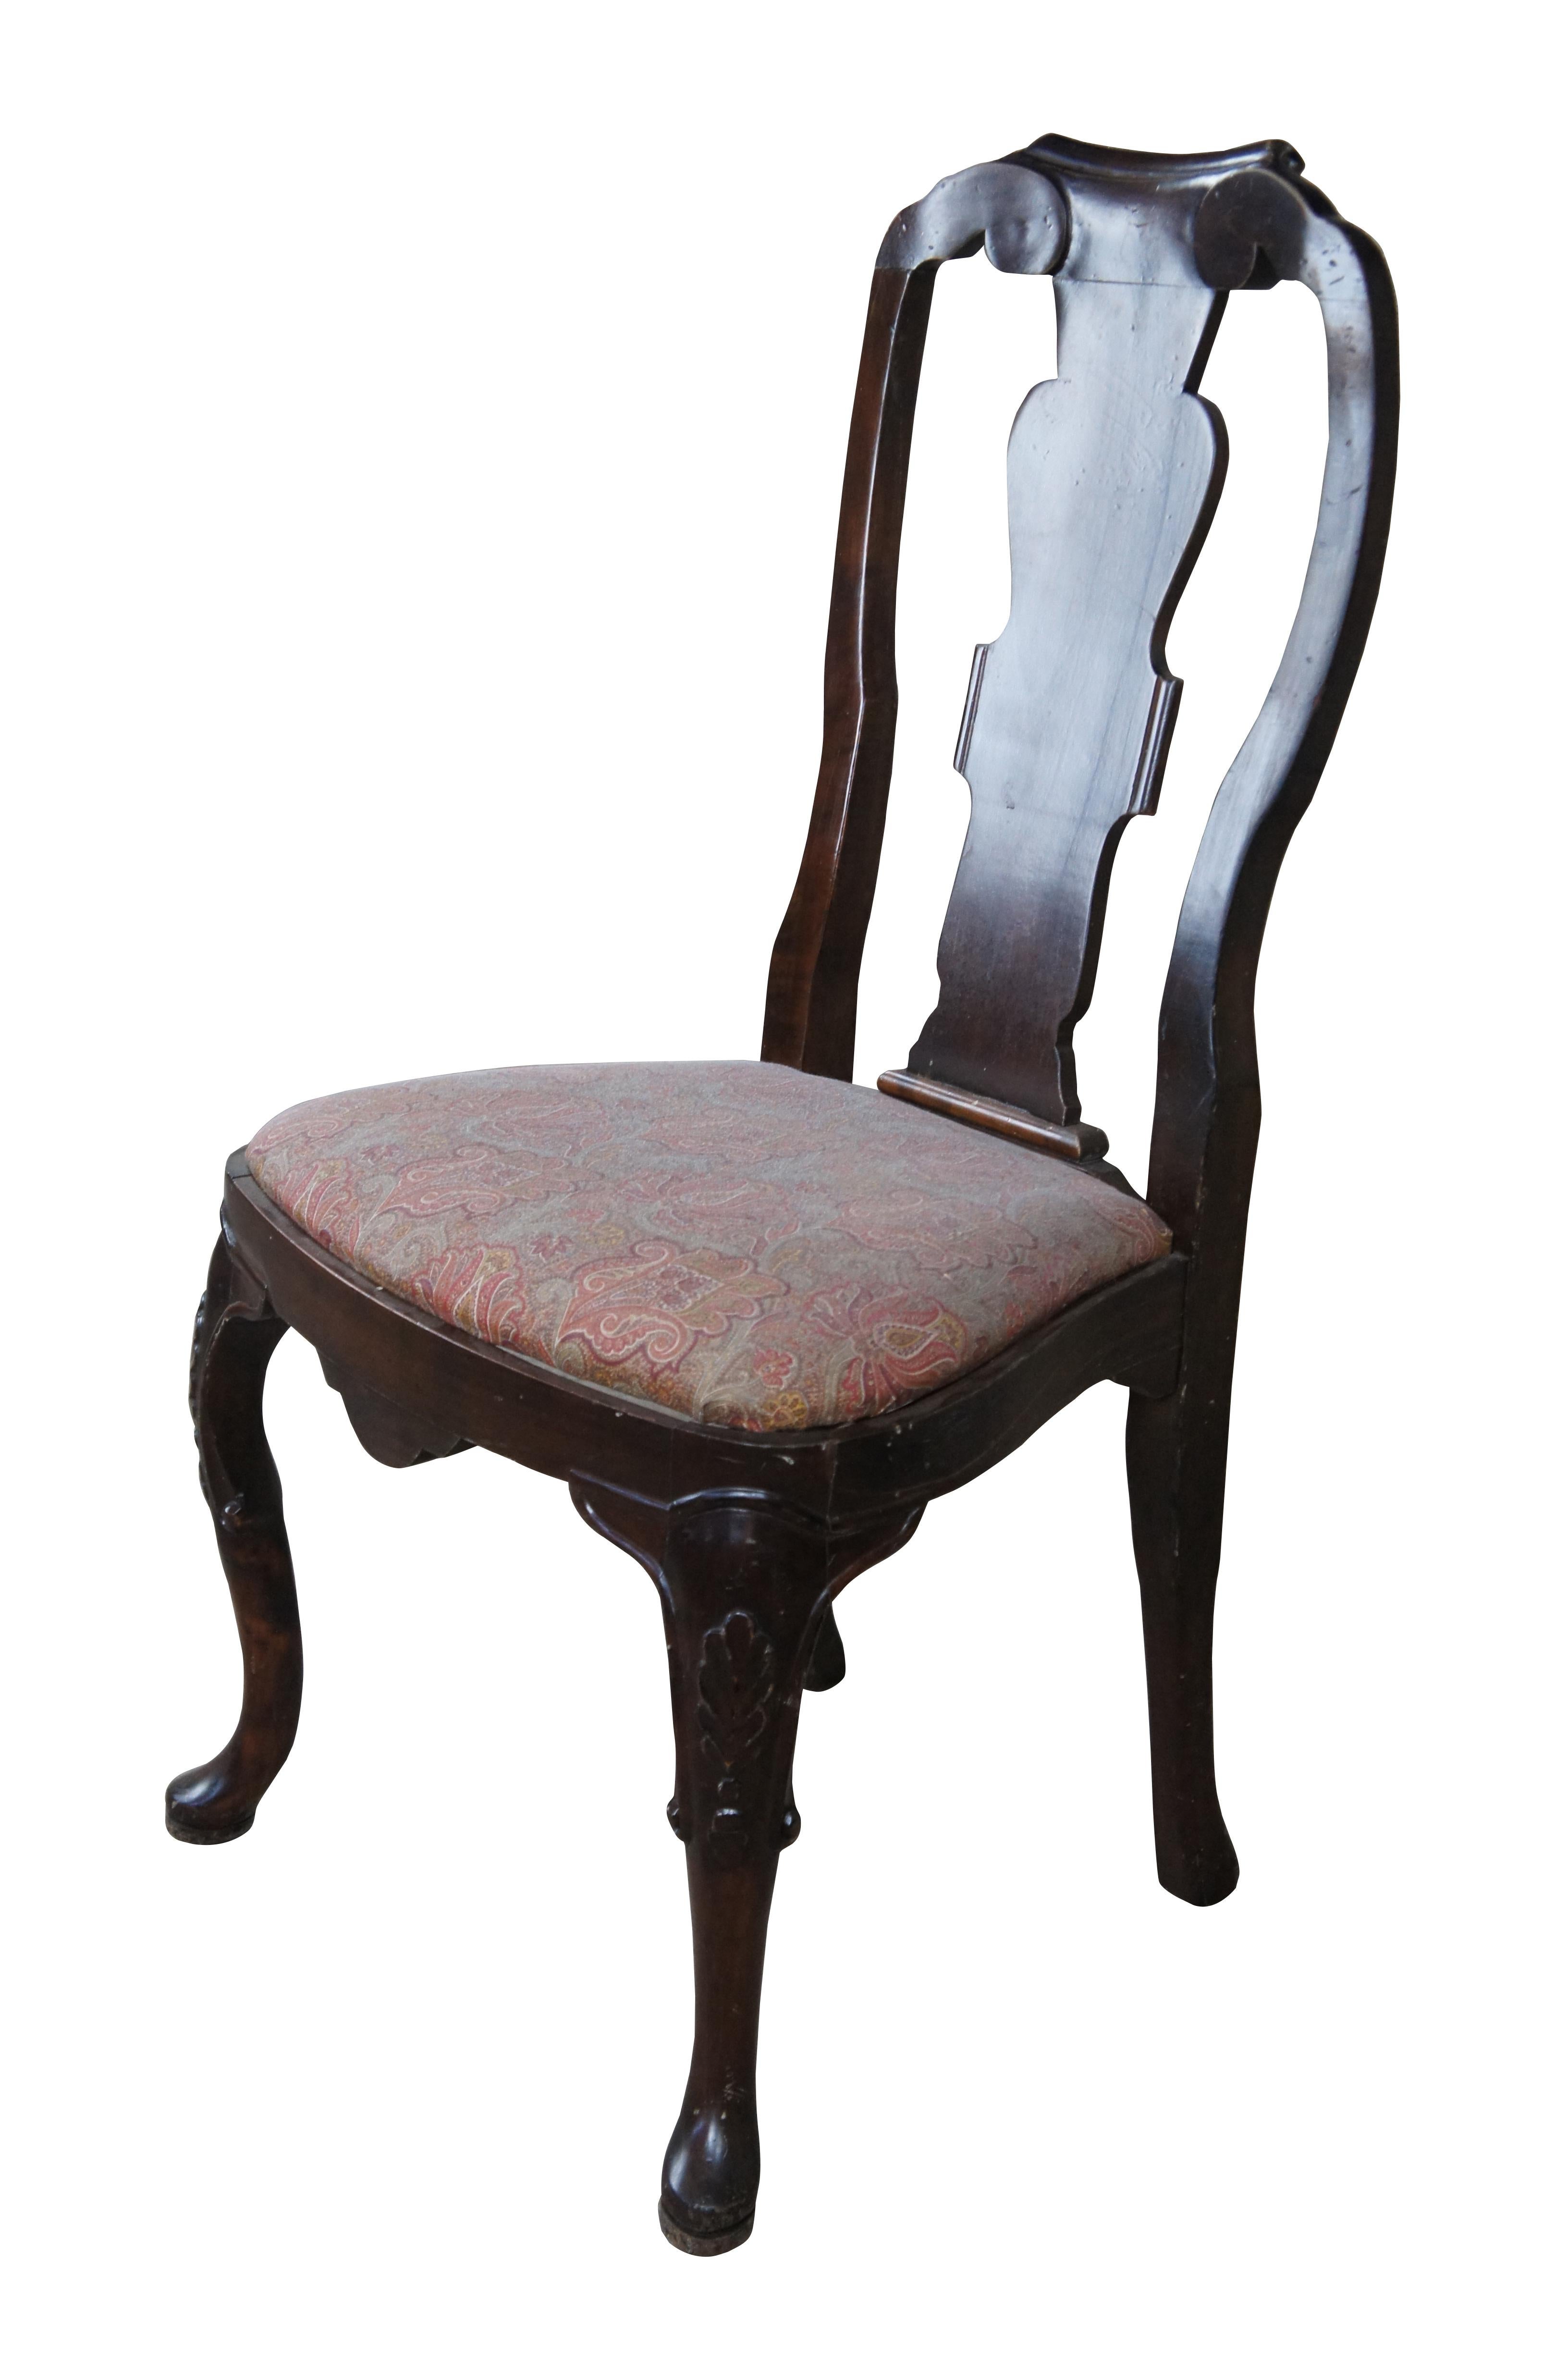 Italian side chair, circa last quarter 20th century.  Featured an aged appearance in Queen Anne styling with long slender back featuring scrolled accents.  Seat is upholstered with paisley design over cabriole legs with carved knees.